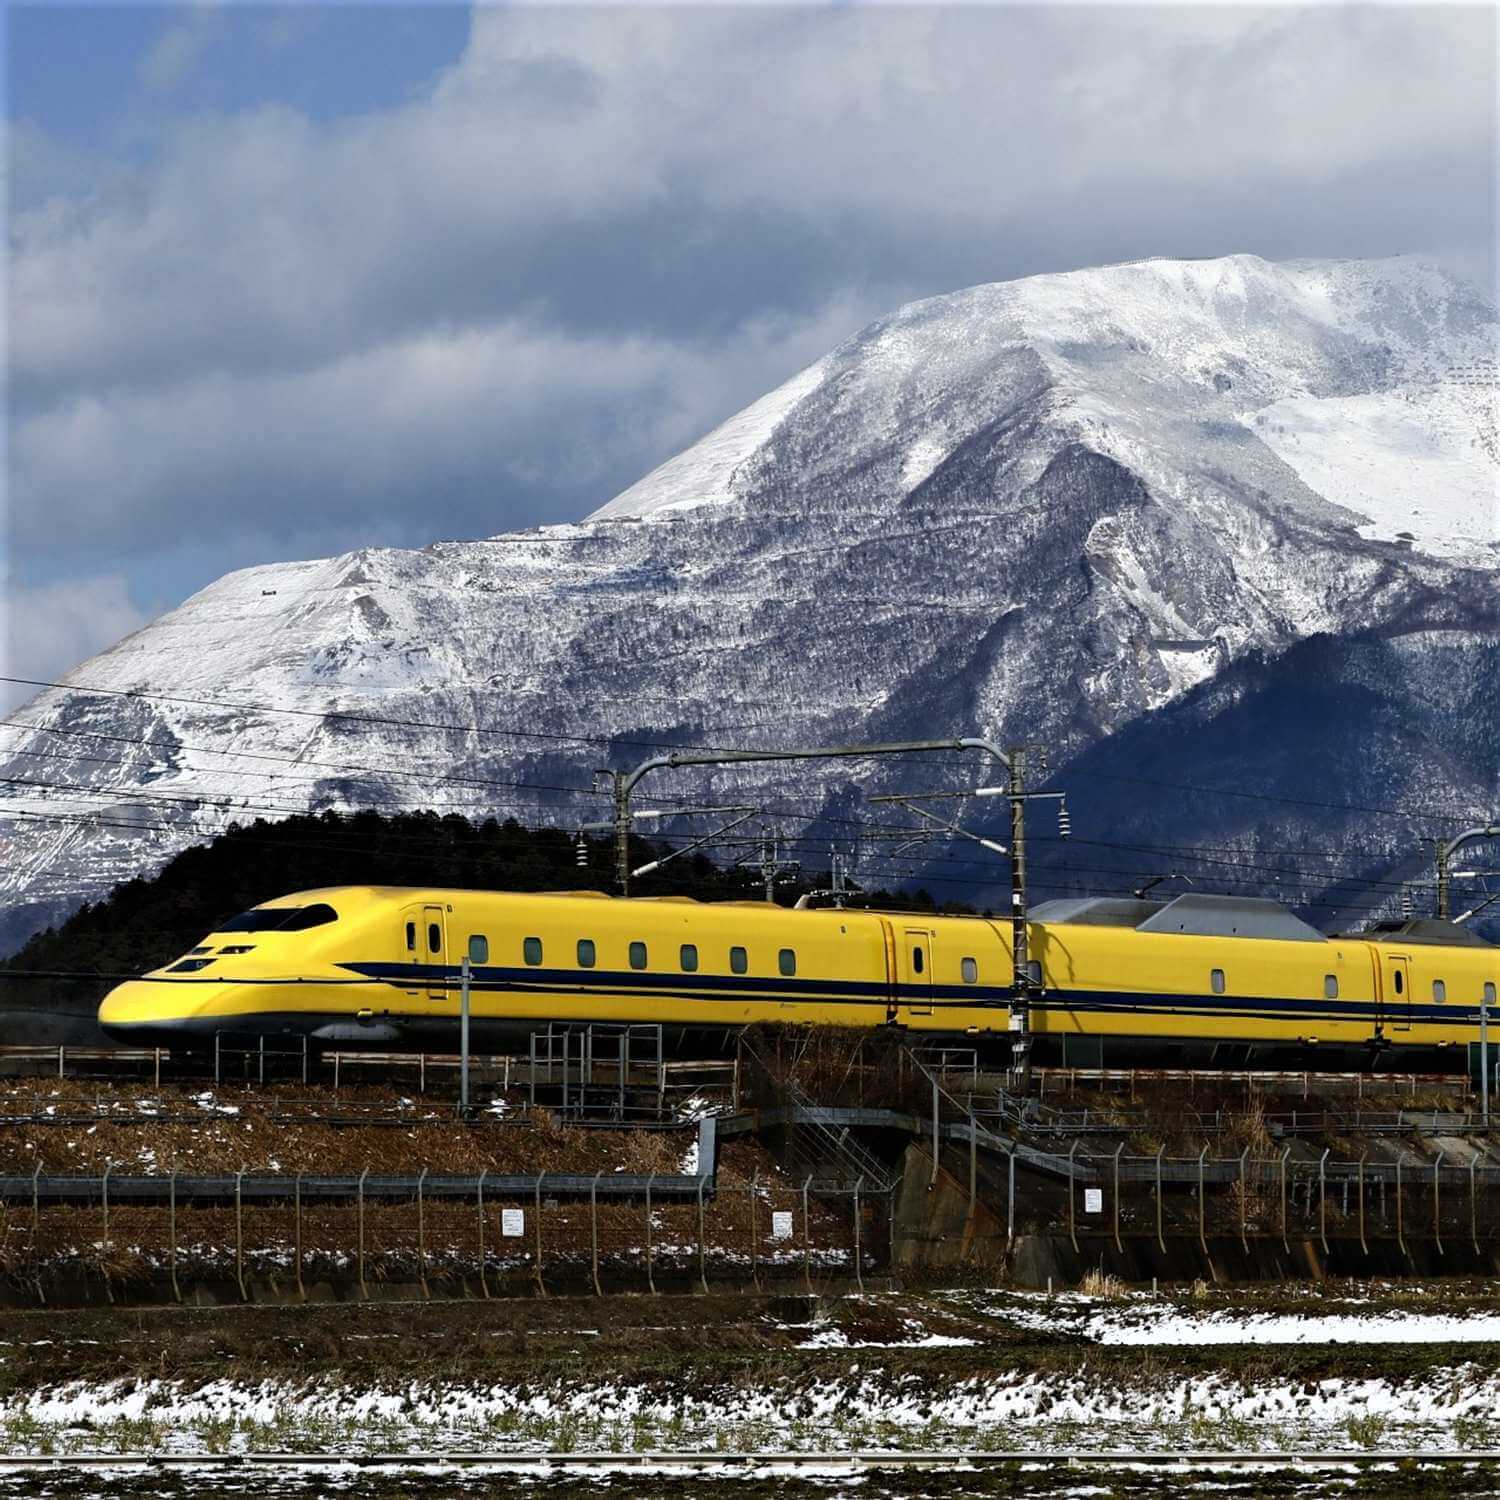 The Shinkansen connects various parts of Japan in accurate time 6